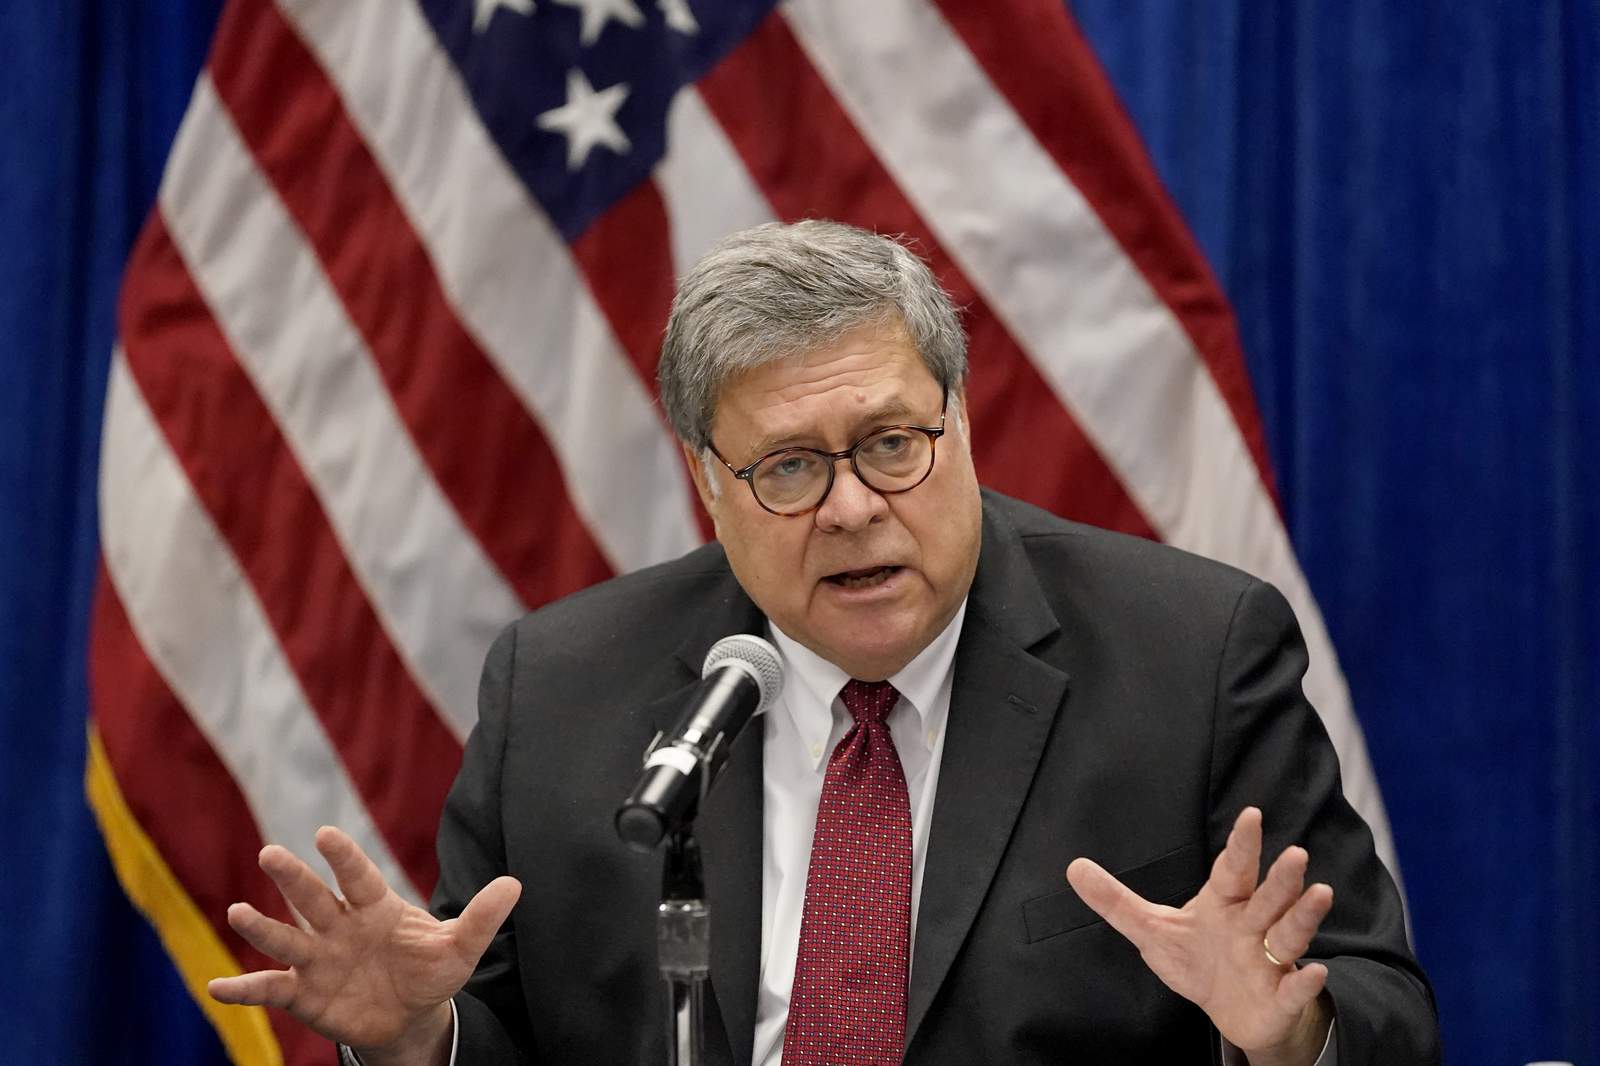 AG Barr: ‘No reason’ for special counsel on election, Biden’s son